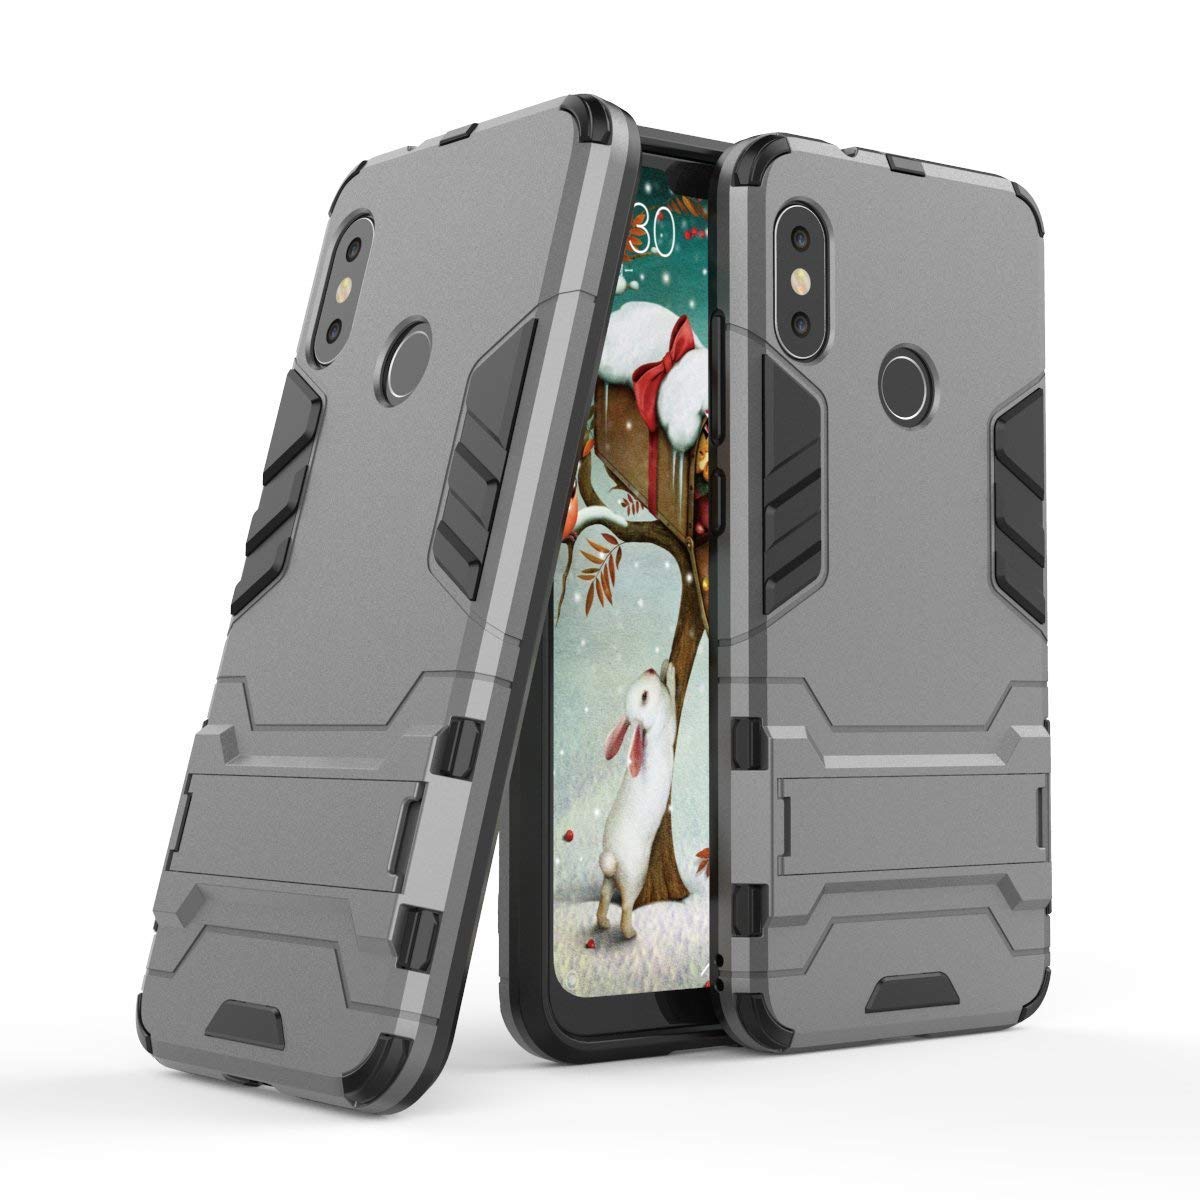 D3 Shock Proof Kickstand Hybrid Back Case for Redmi Note 6 / Note 6 Pro  Grey 